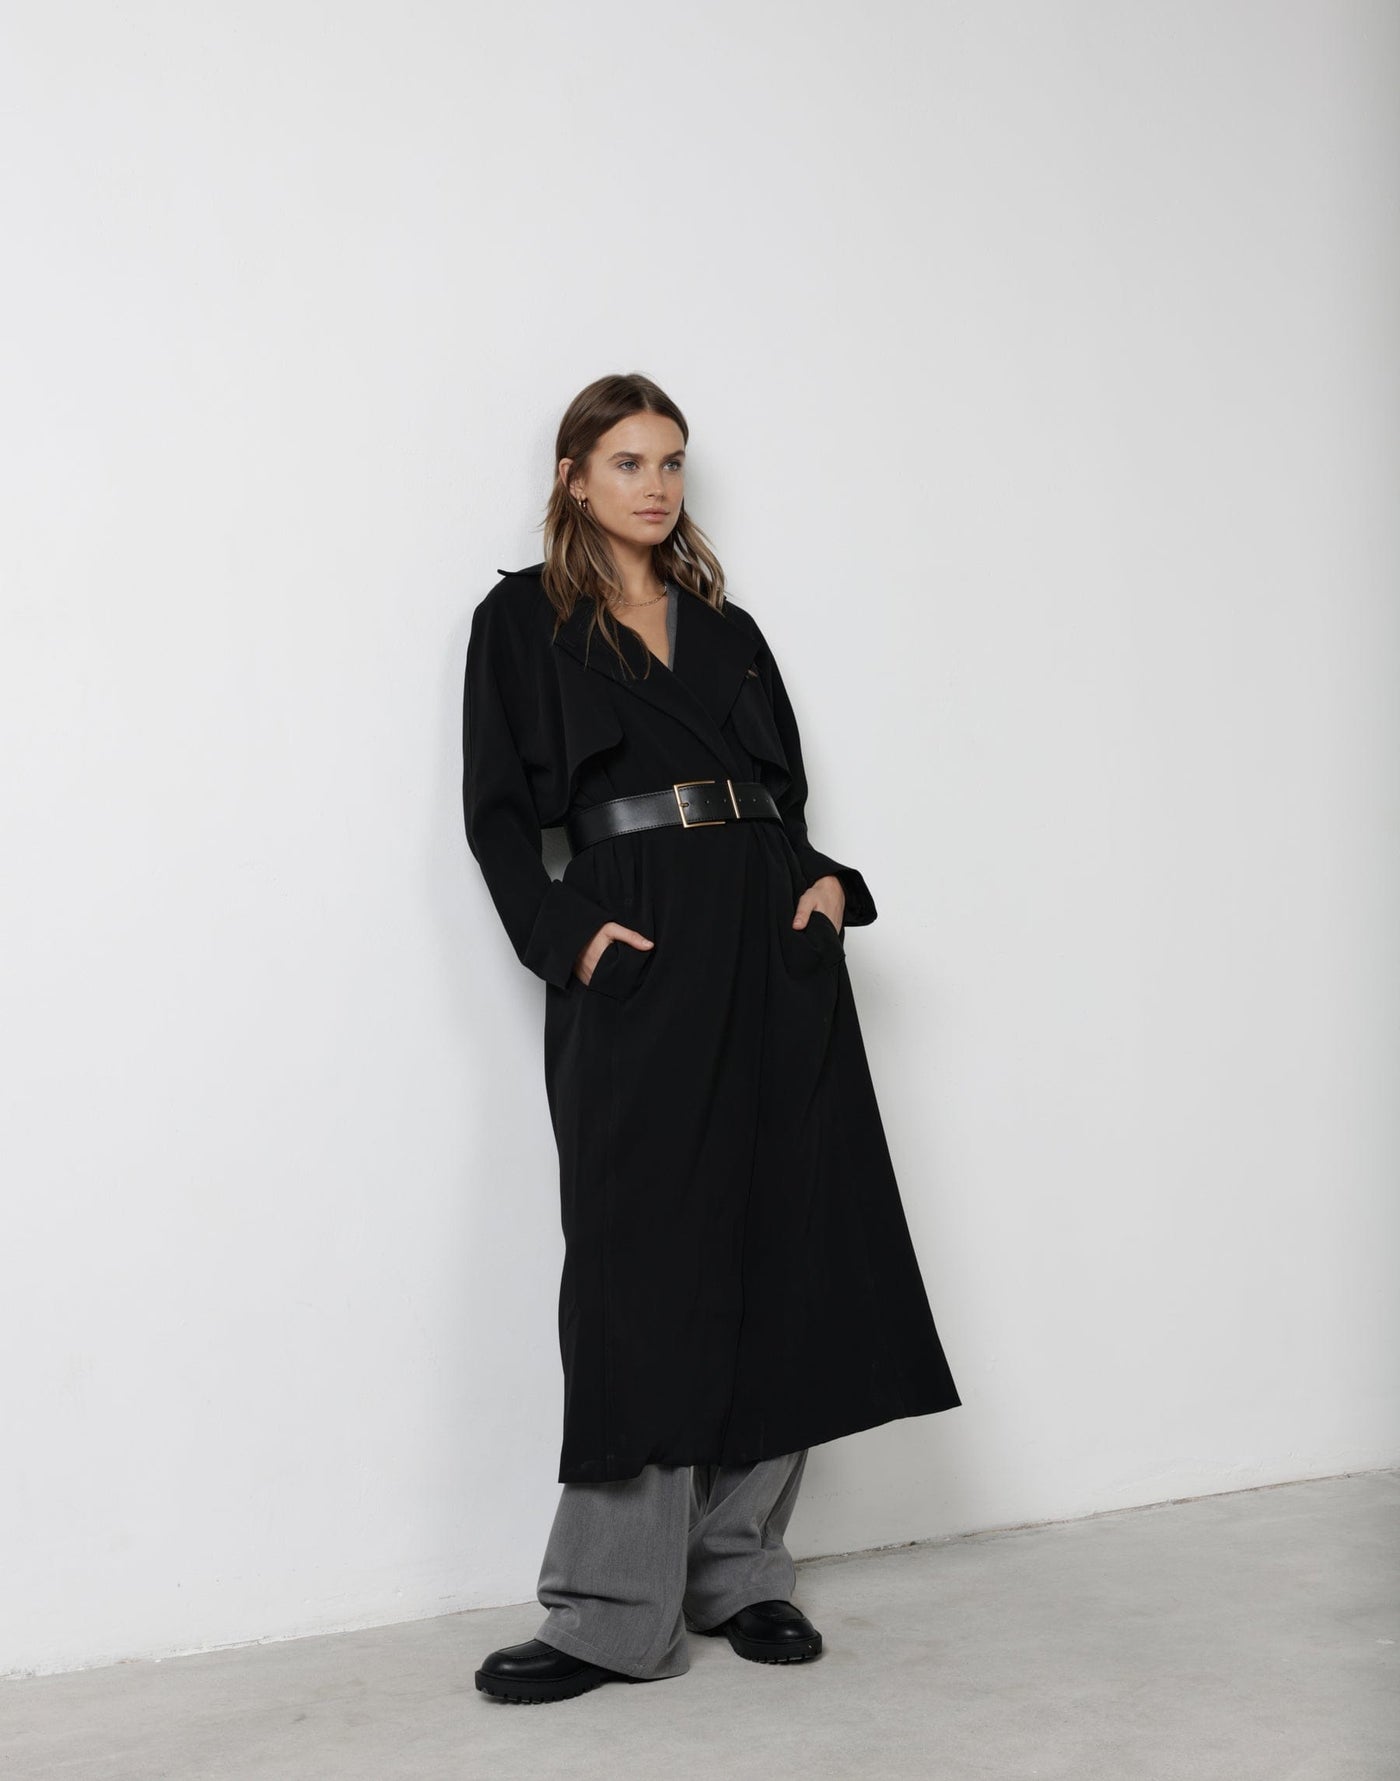 Zander Trench Coat (Black) - Black Trench Coat - Women's Outerwear - Charcoal Clothing